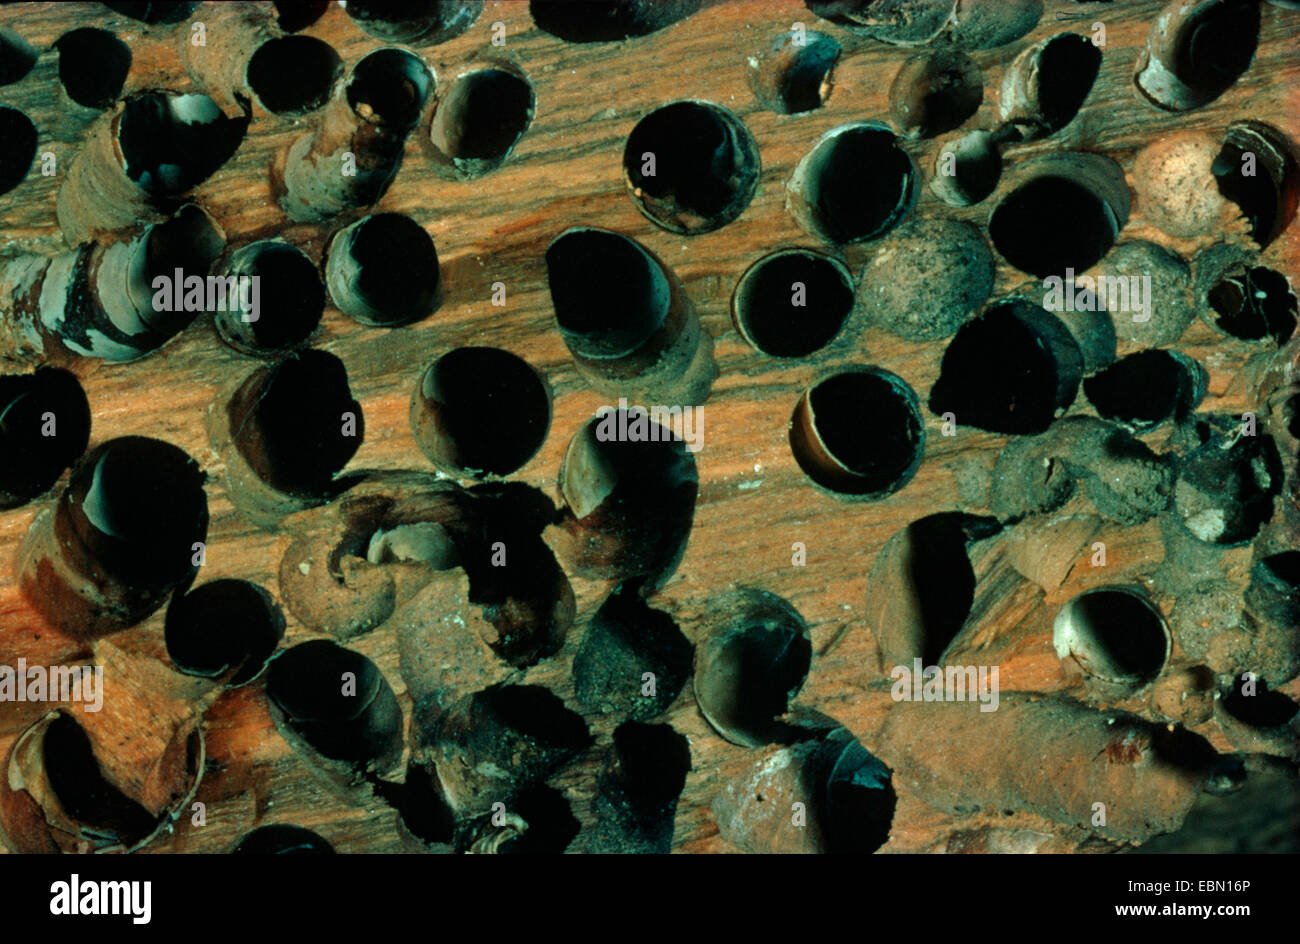 naval shipworm, common shipworm, great shipworm (Teredo navalis), typical drill holes in drift wood Stock Photo